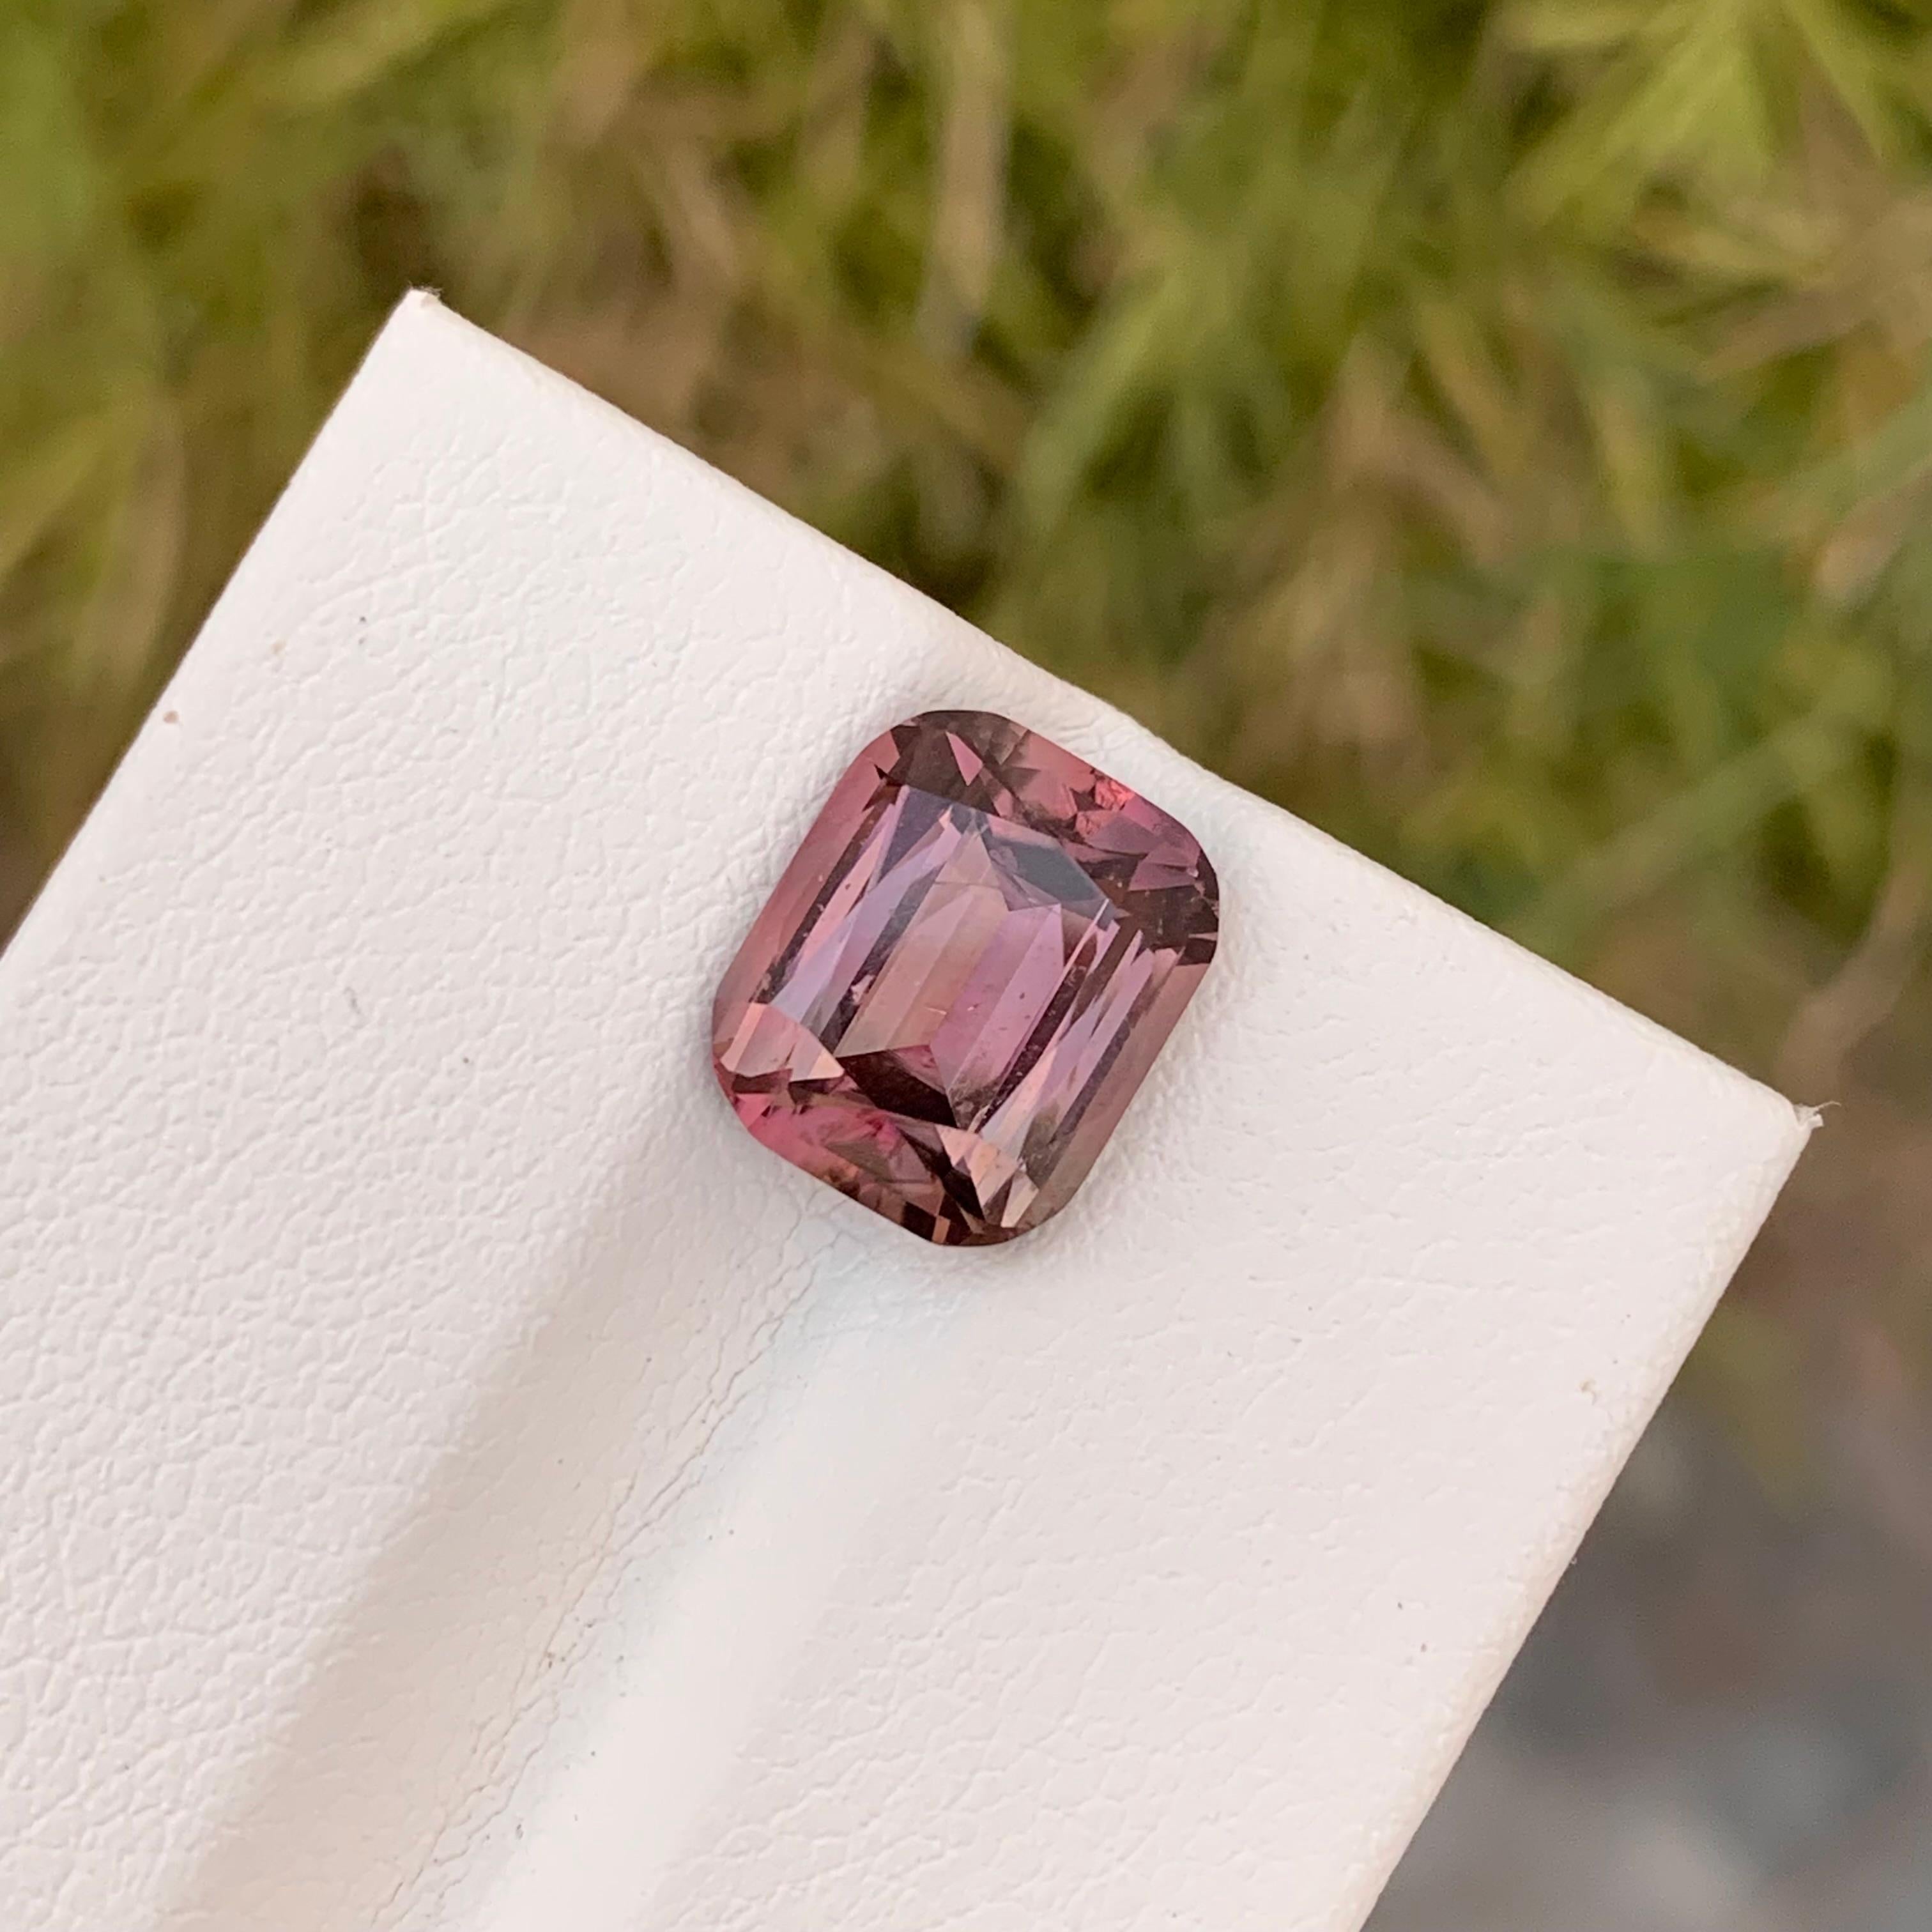 3.75 Carat Pretty Loose Peach Pink Tourmaline Cushion Shape Gem From Afghanistan For Sale 3